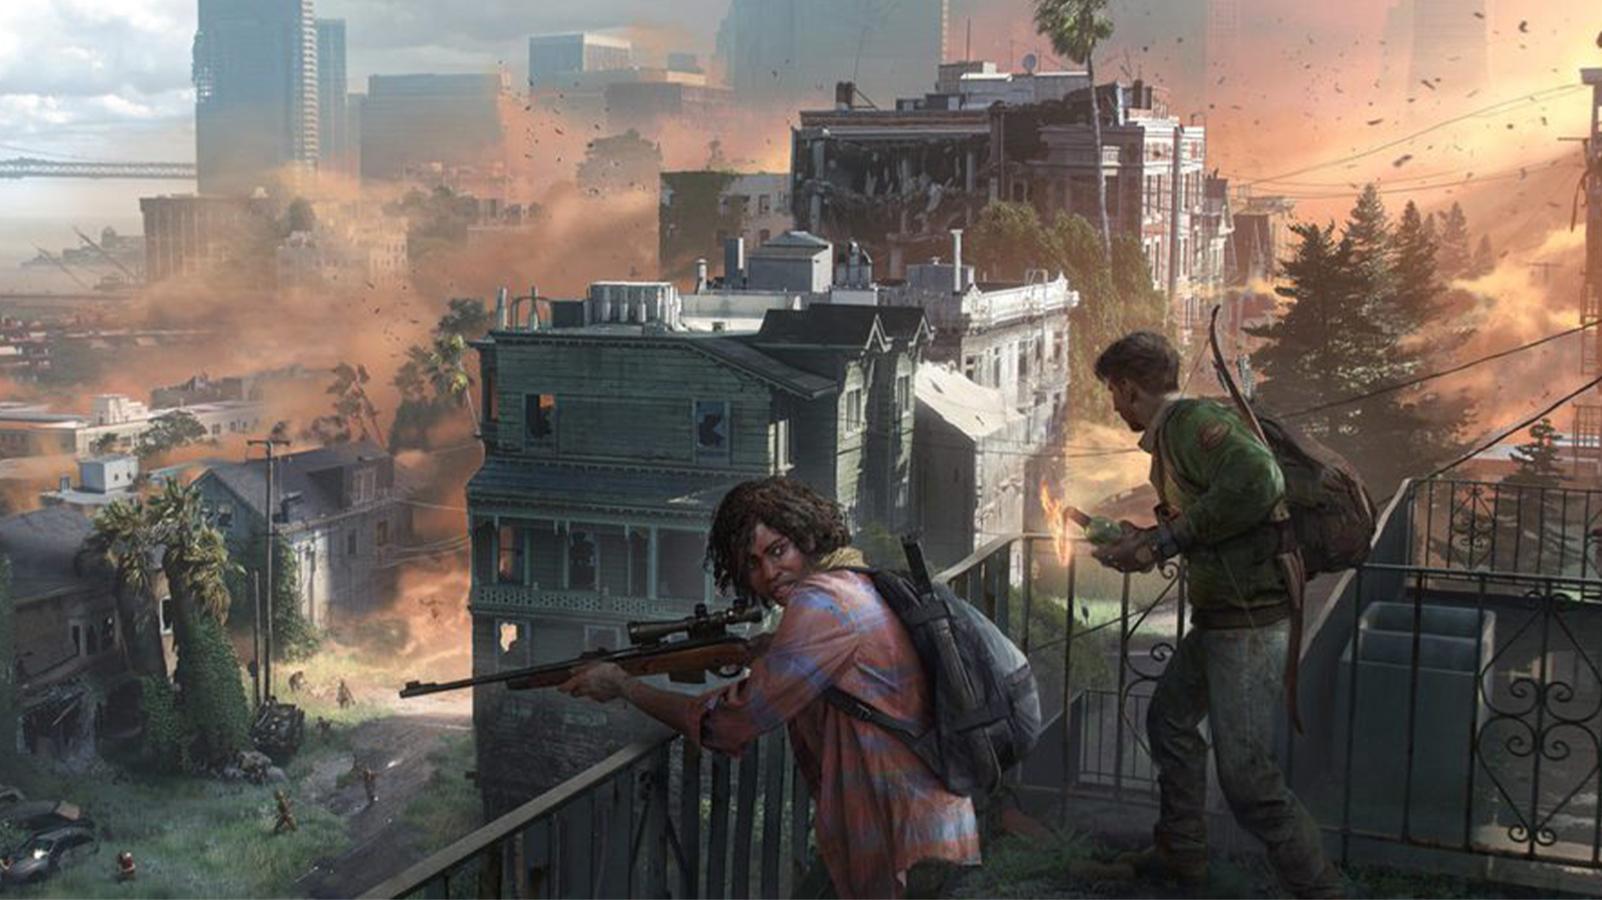 The Last Of Us Episode 4 Review - 6 Ups & 2 Downs